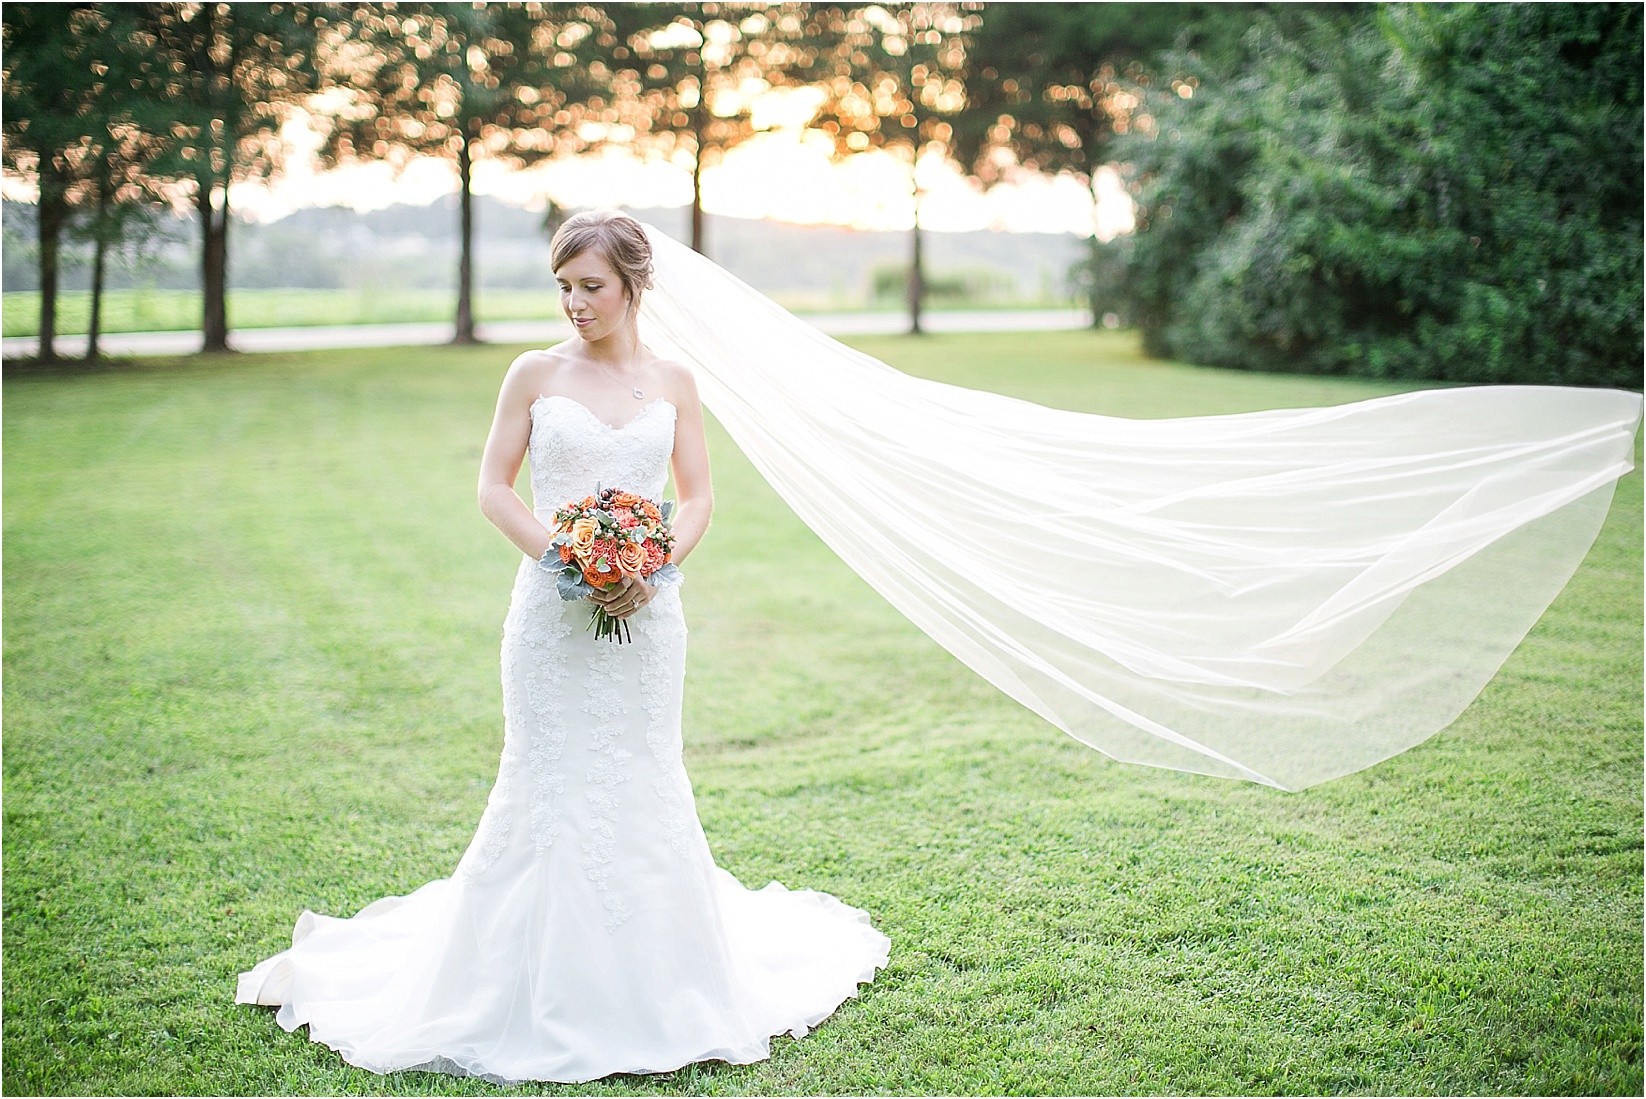 Flying veil in the wind during anna's beaver dam bridal session in davidson north carolina nc